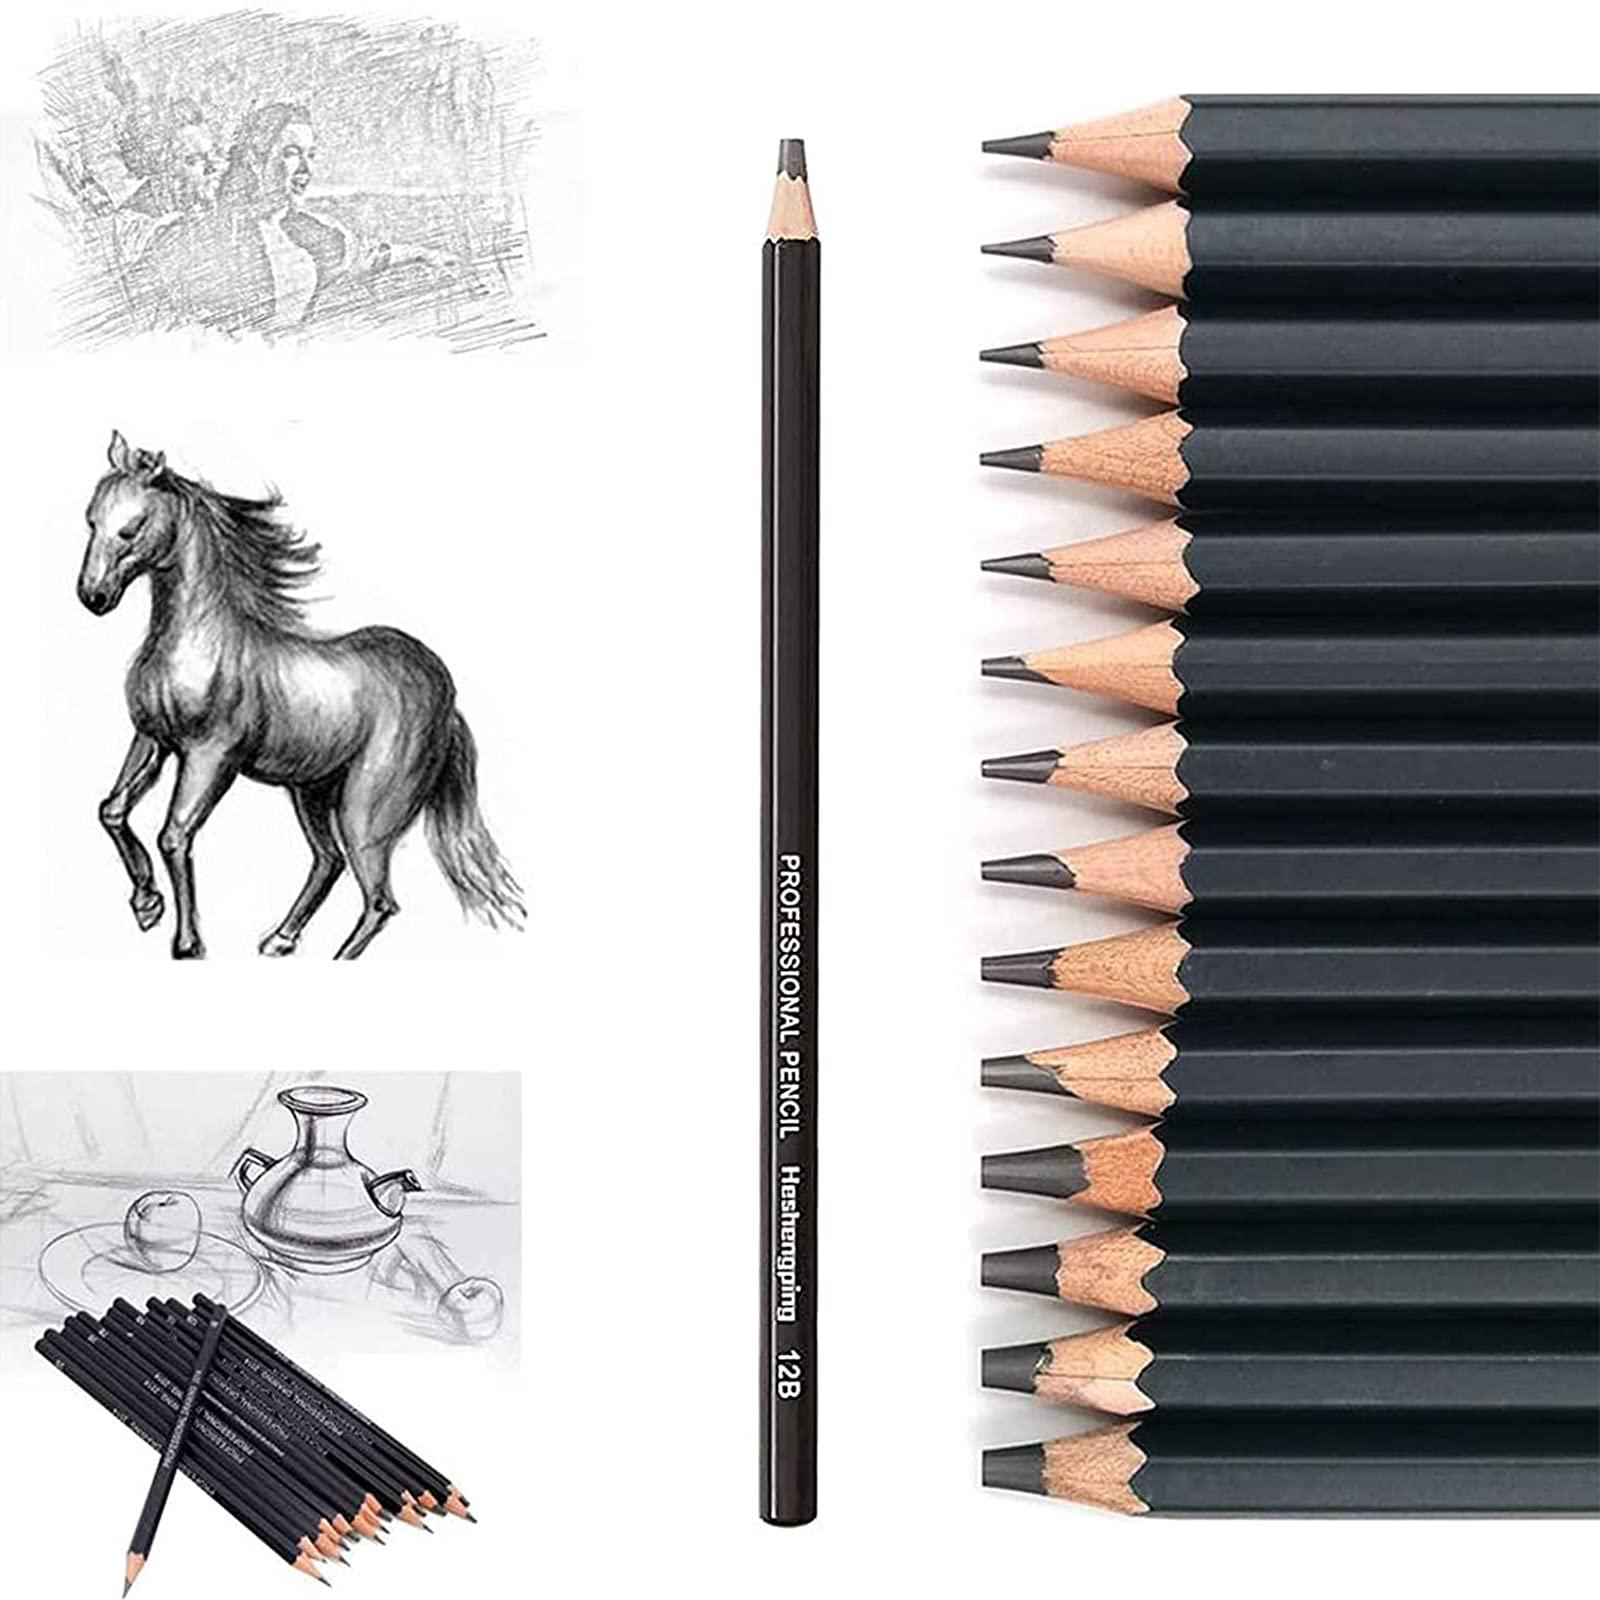 Heshengping heshengping, drawing sketch pencil set 14pcs sketching pencils  12b 10b 8b 7b 6b 5b 4b 3b 2b b hb 2h 4h 6h graphite pencils fo